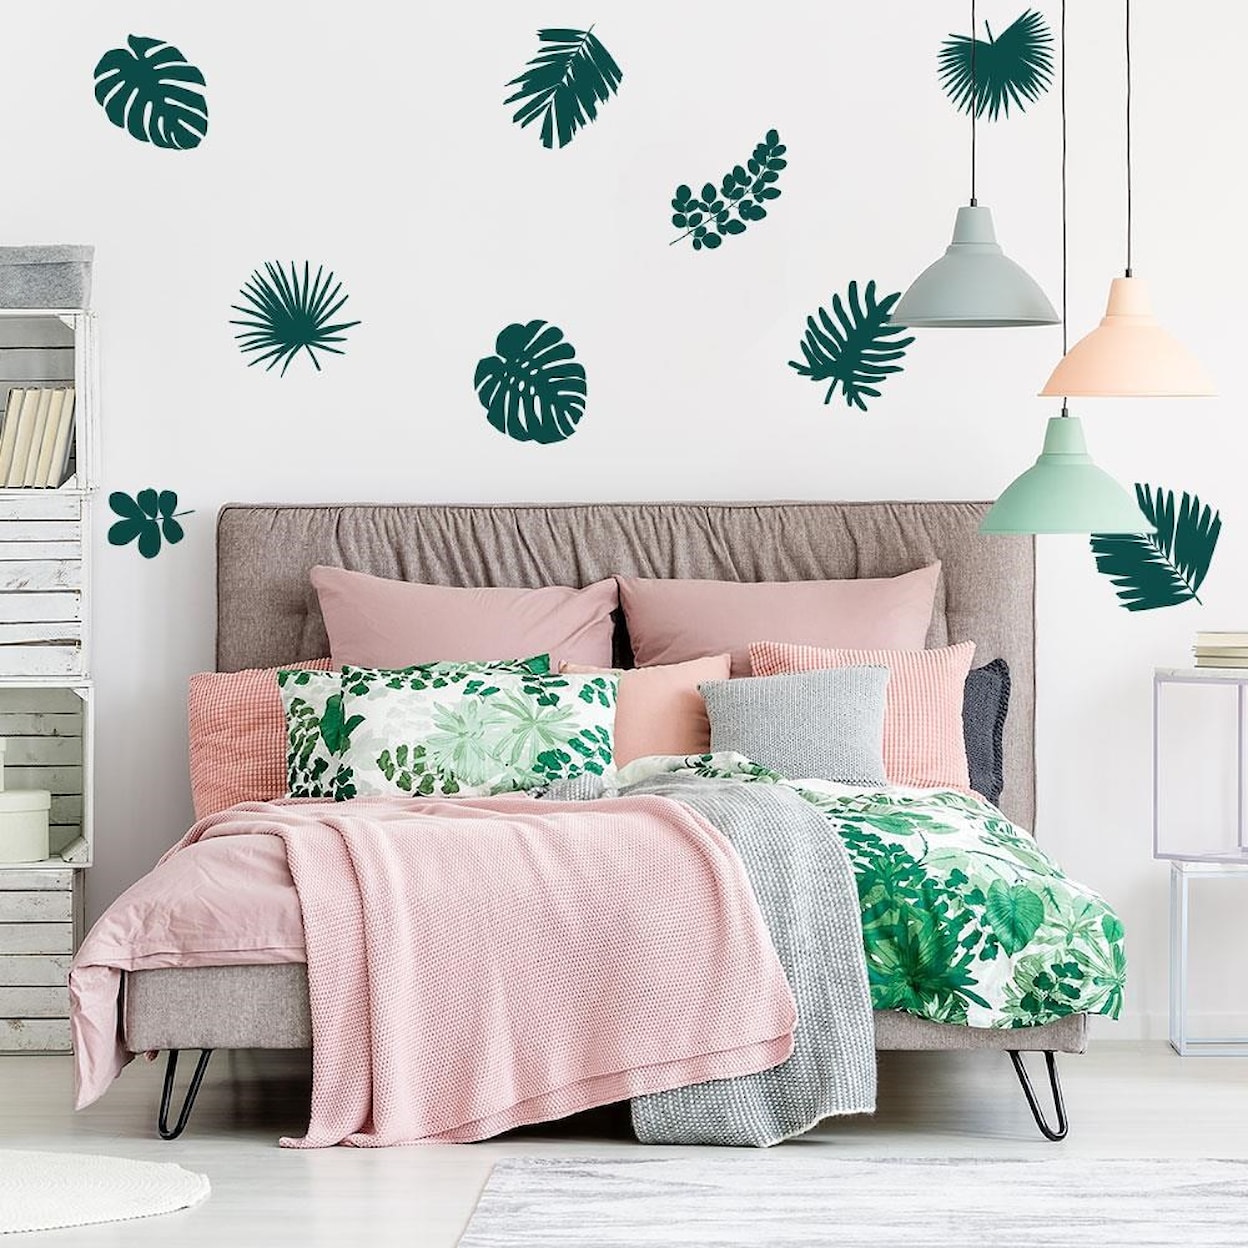 Tempaper Wall Decals Graphic Palm Leaf